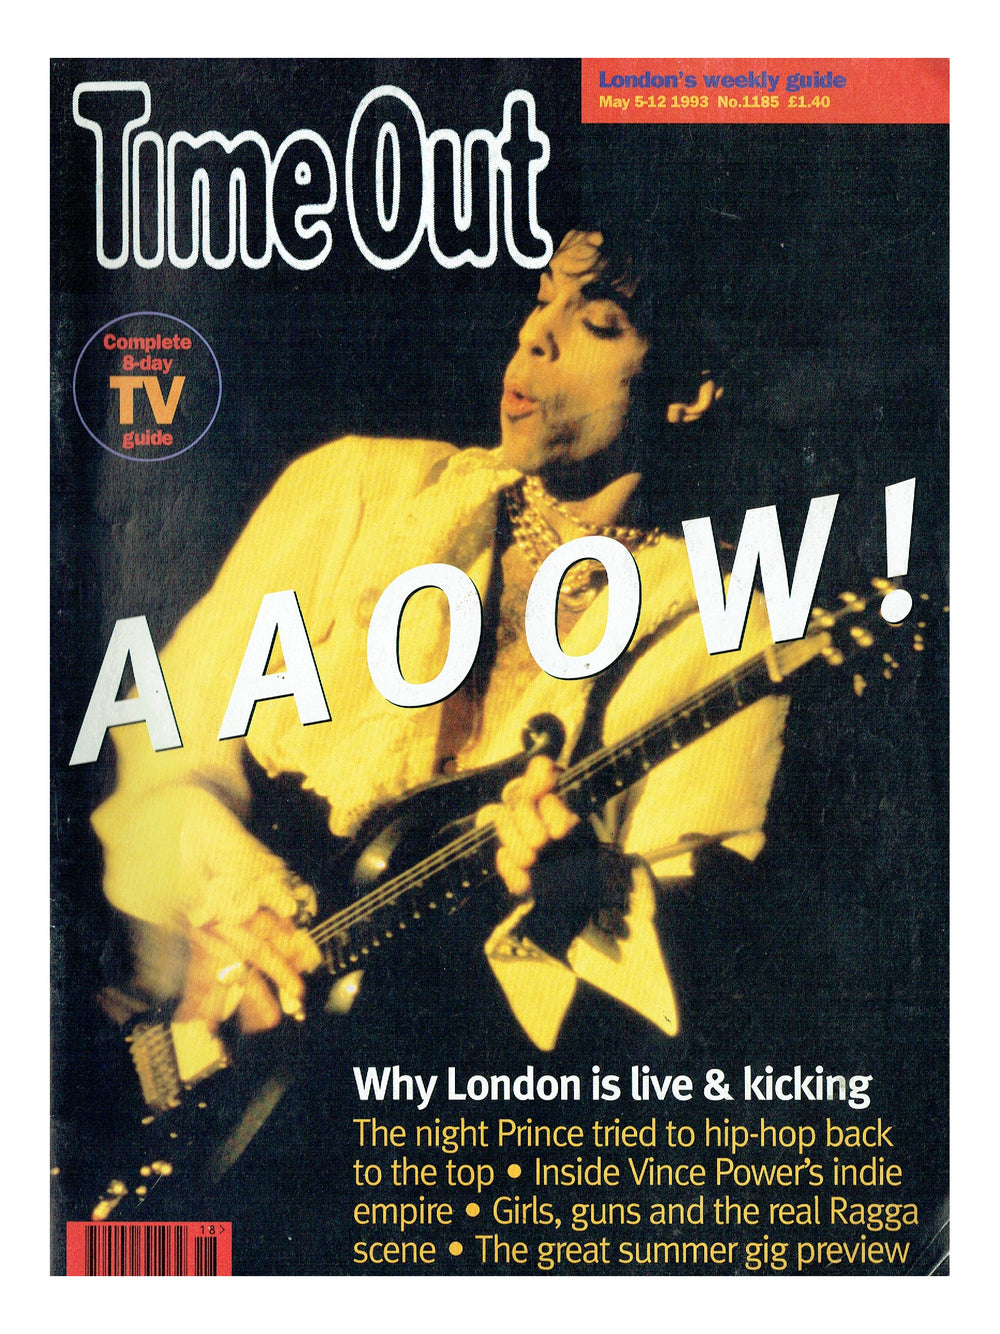 Prince – Time Out London Weekly Guide May 1993 Cover & 3 Page Article